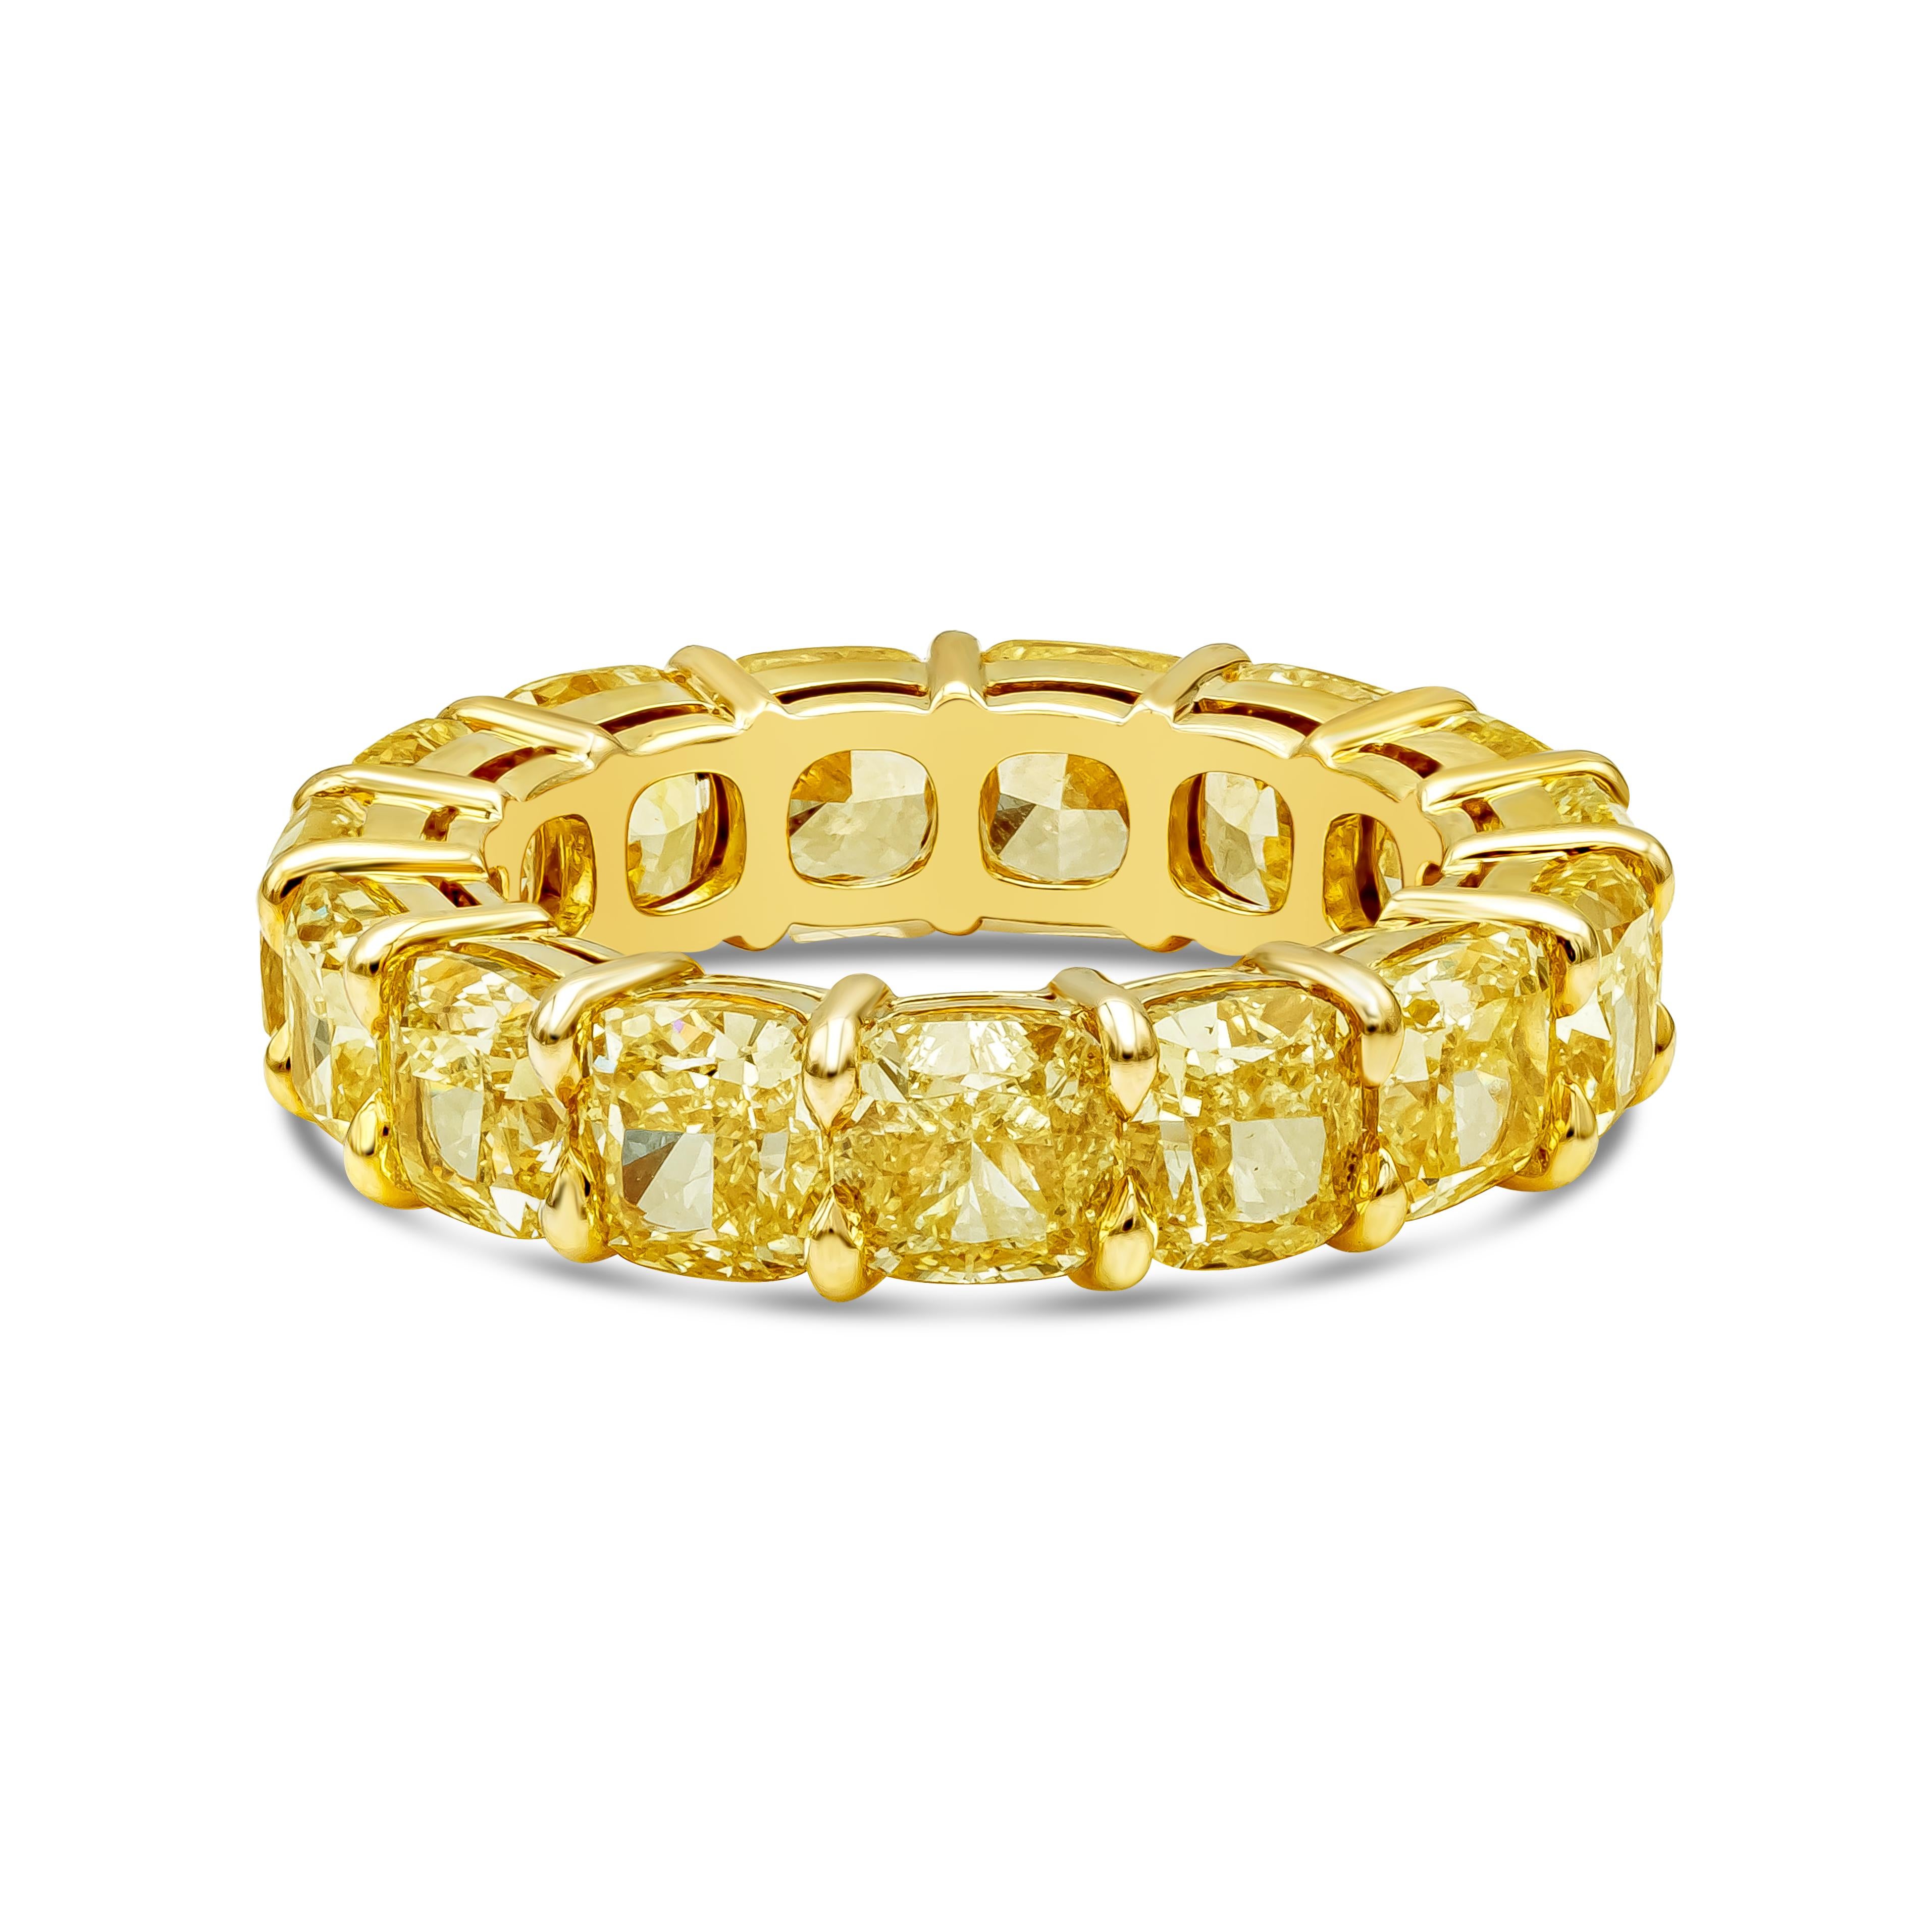 A gorgeous eternity wedding band set with 15 stunning GIA Certified Fancy Yellow Cushion Cut Diamonds, VS in Clarity. Diamonds Weigh 10.83 carats total. Set in 18K Yellow Gold. Size 6.25 US.

Roman Malakov is a custom house, specializing in creating